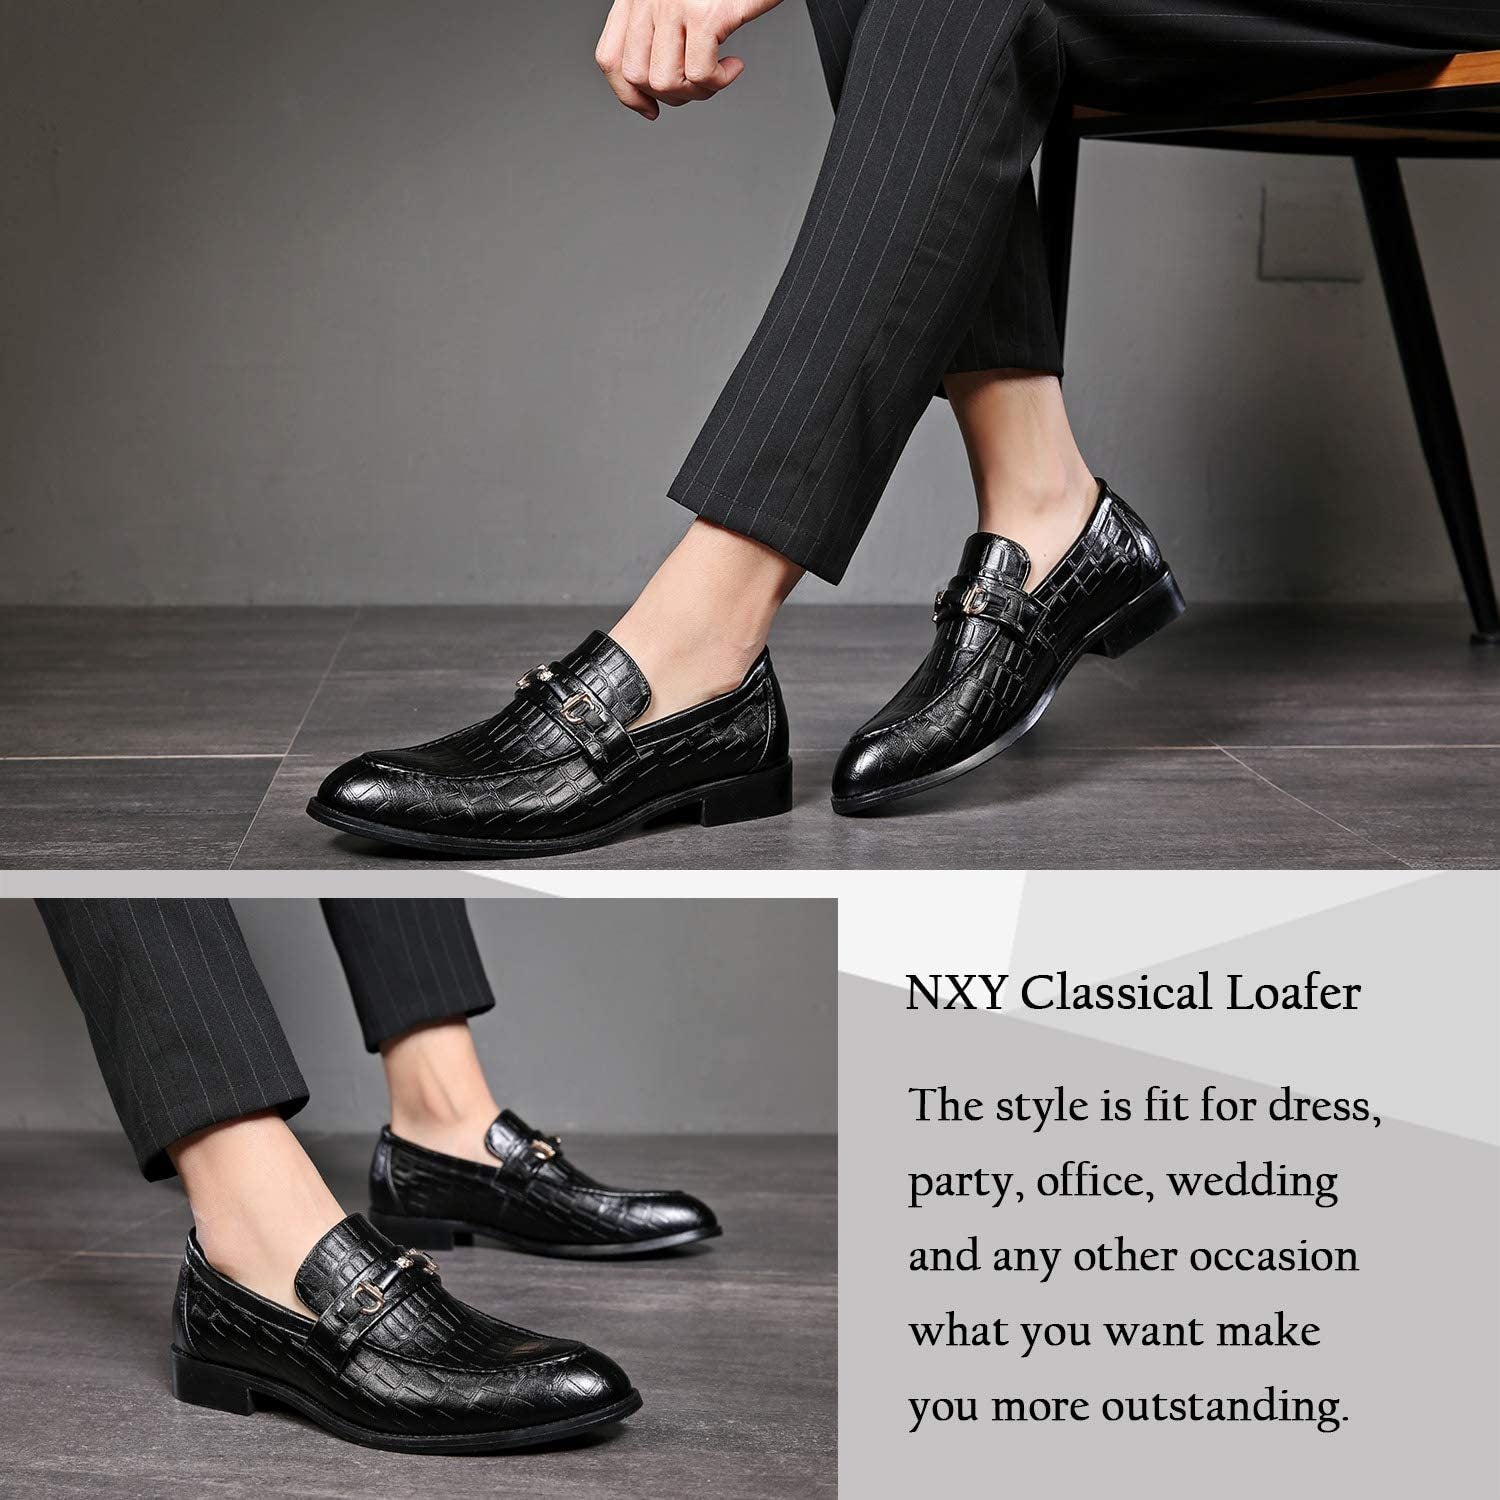 NXY White Shoes for Men丨 Men's Driving Shoes &amp; Noble Dress Shoes for Men丨Classic Business Black Loafers for Men 6-13